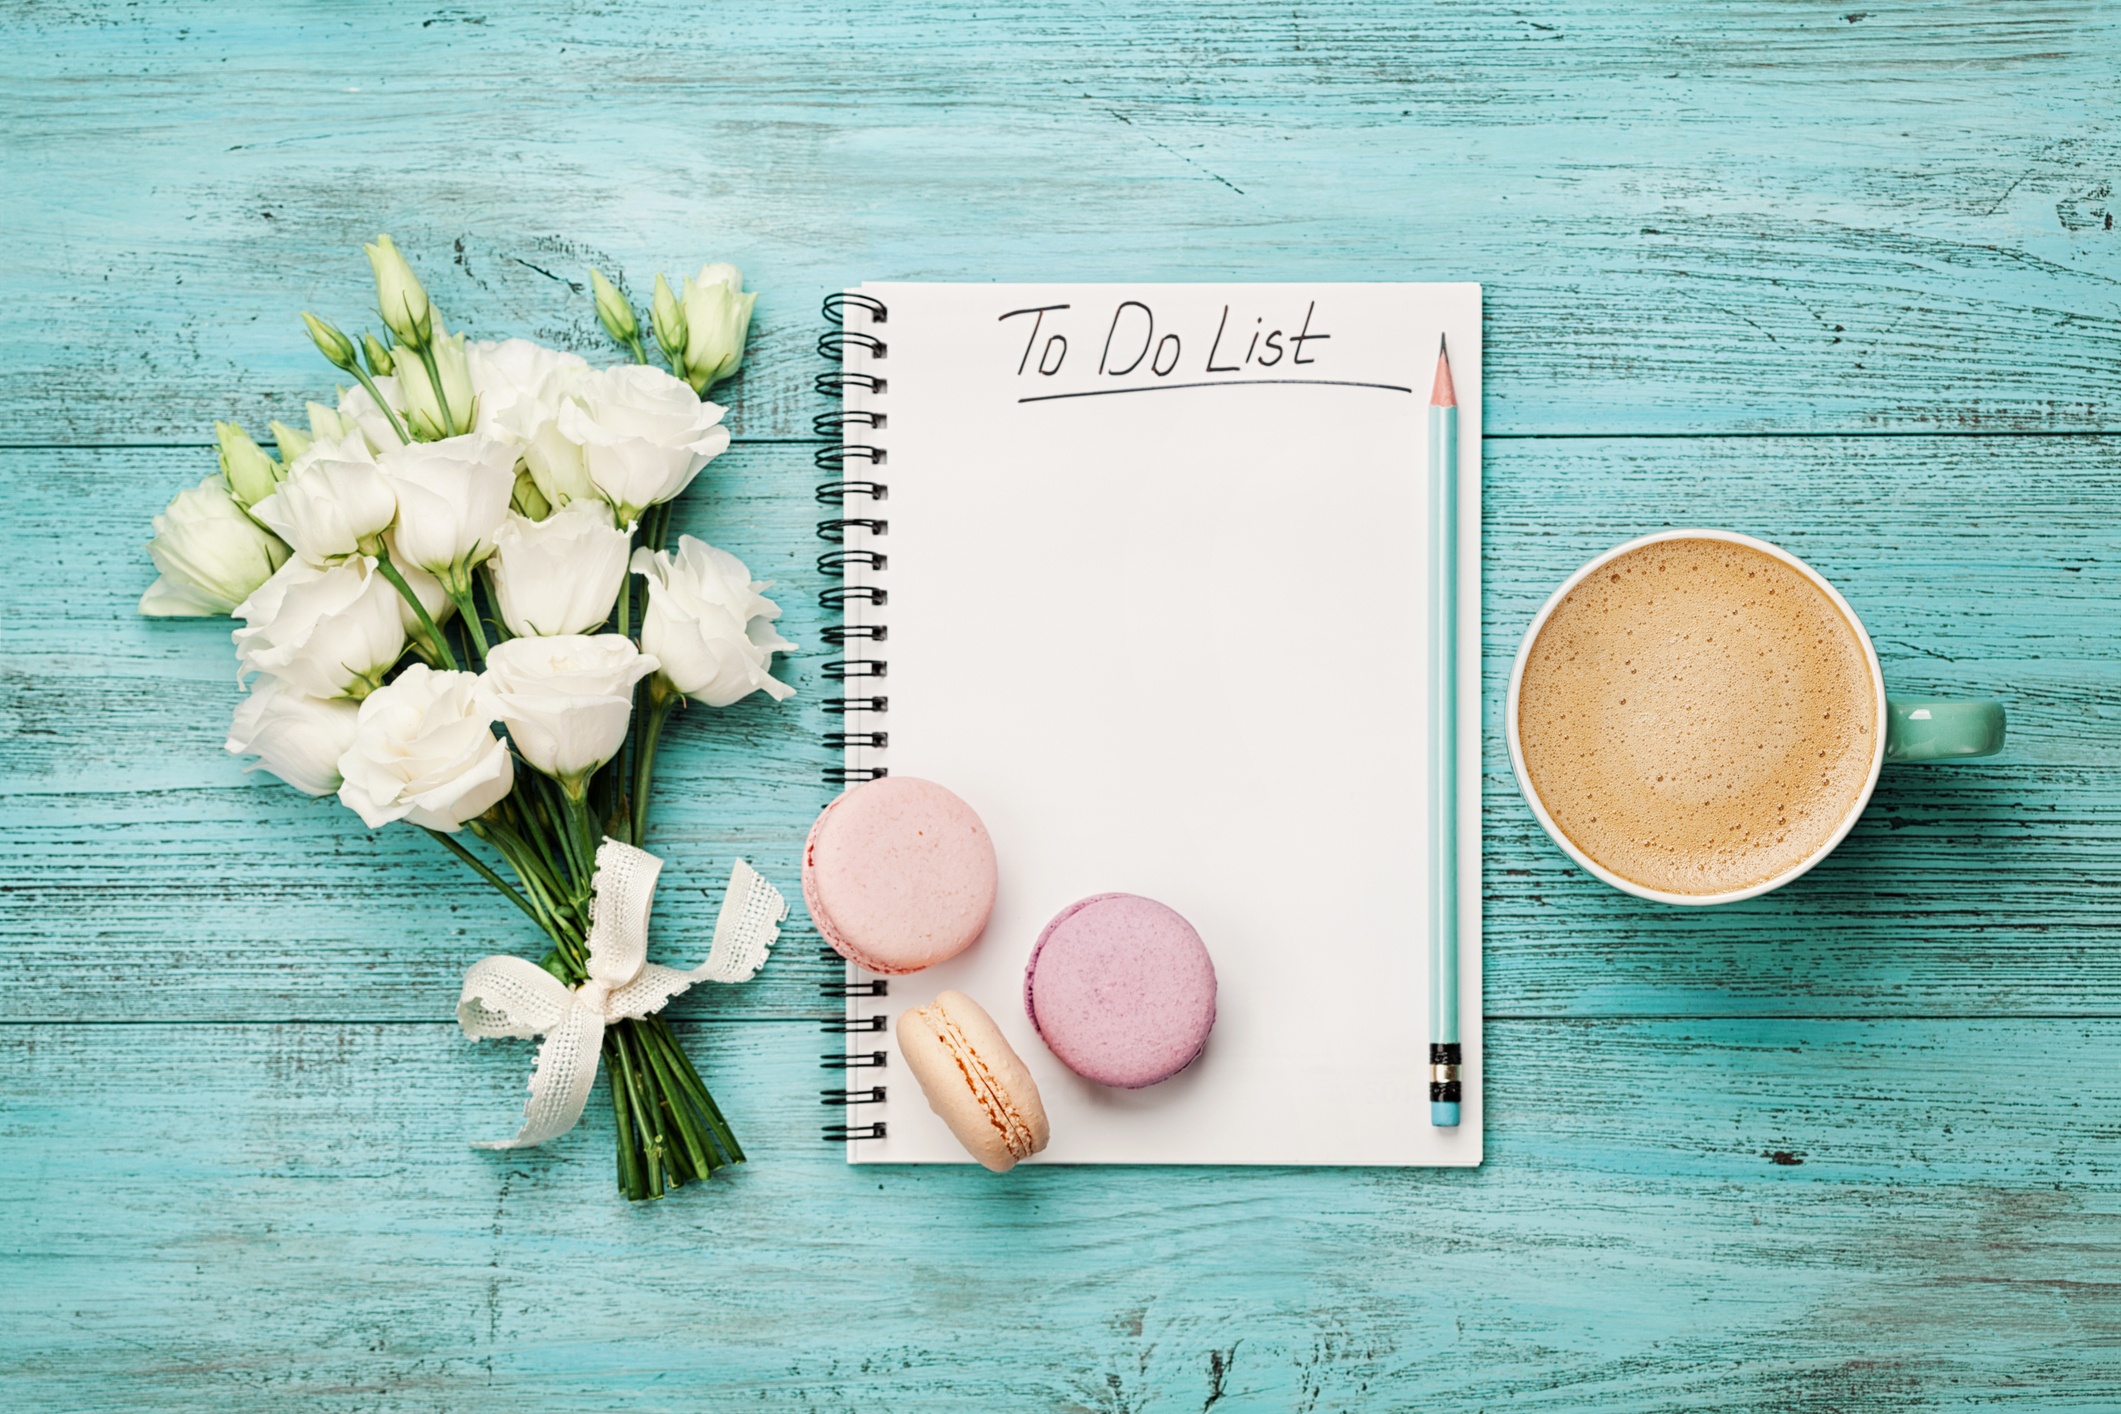 Party Mistake: Focusing Too Much on To-Do Lists 